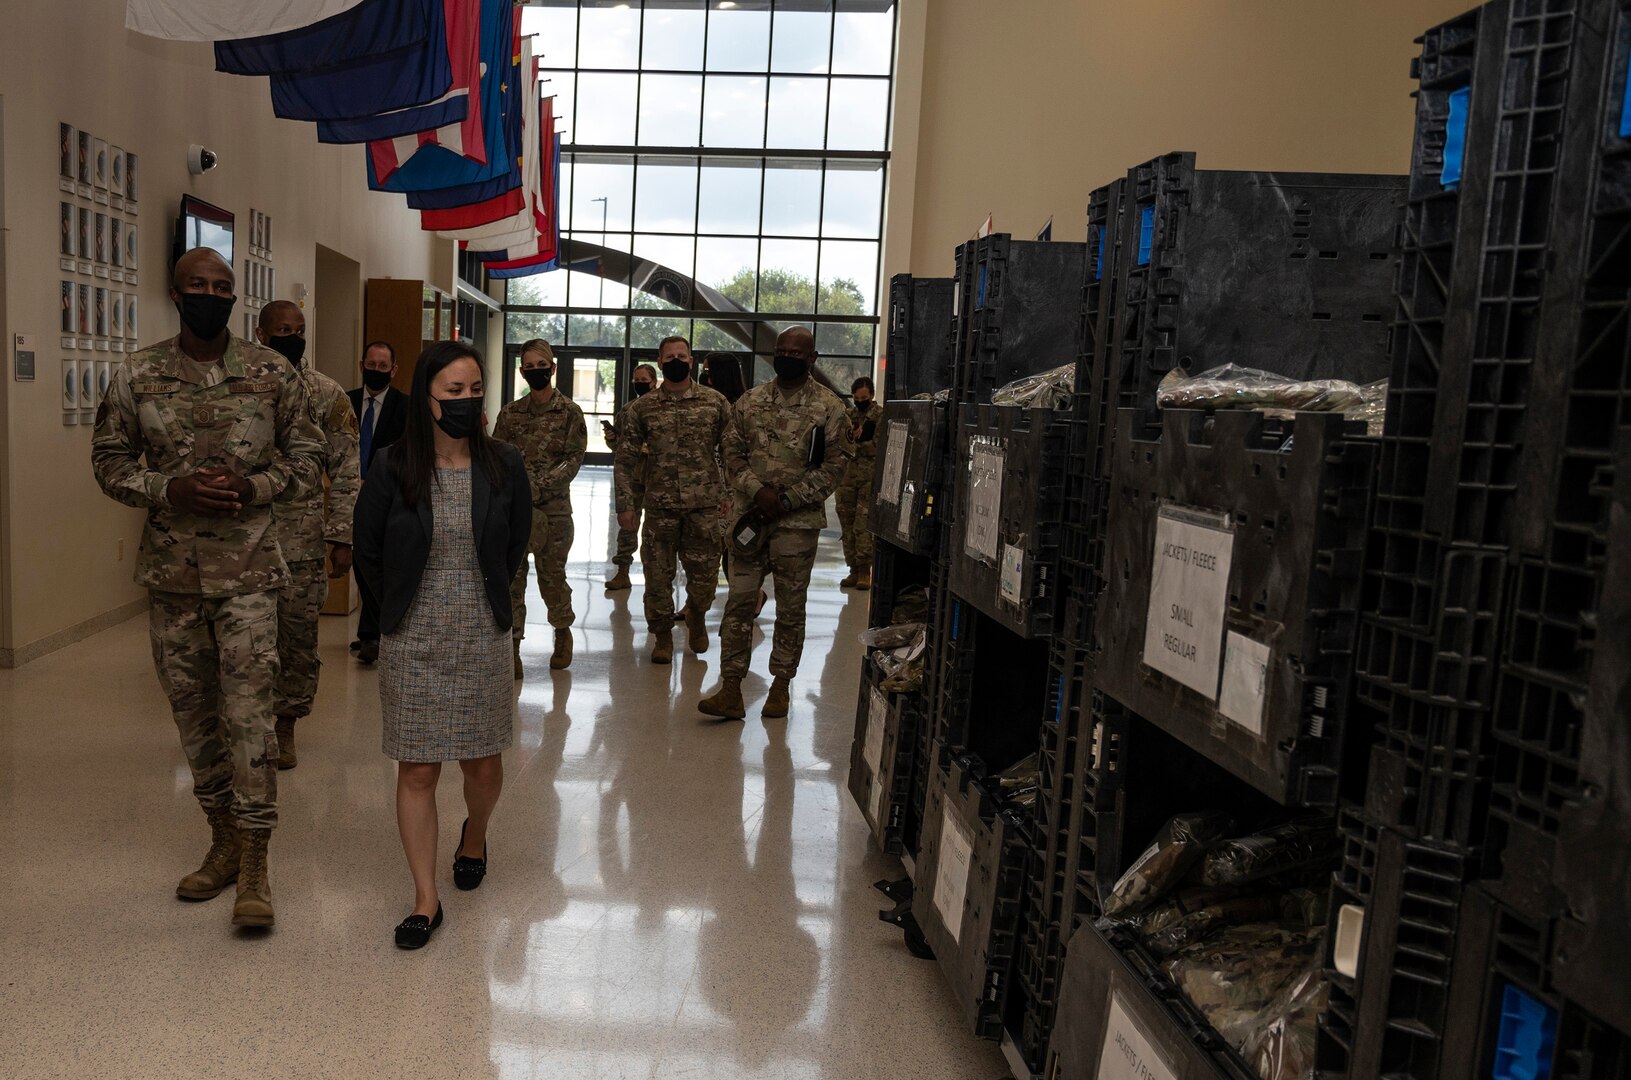 Undersecretary of the Air Force walking past BMT gear issued to trainees.